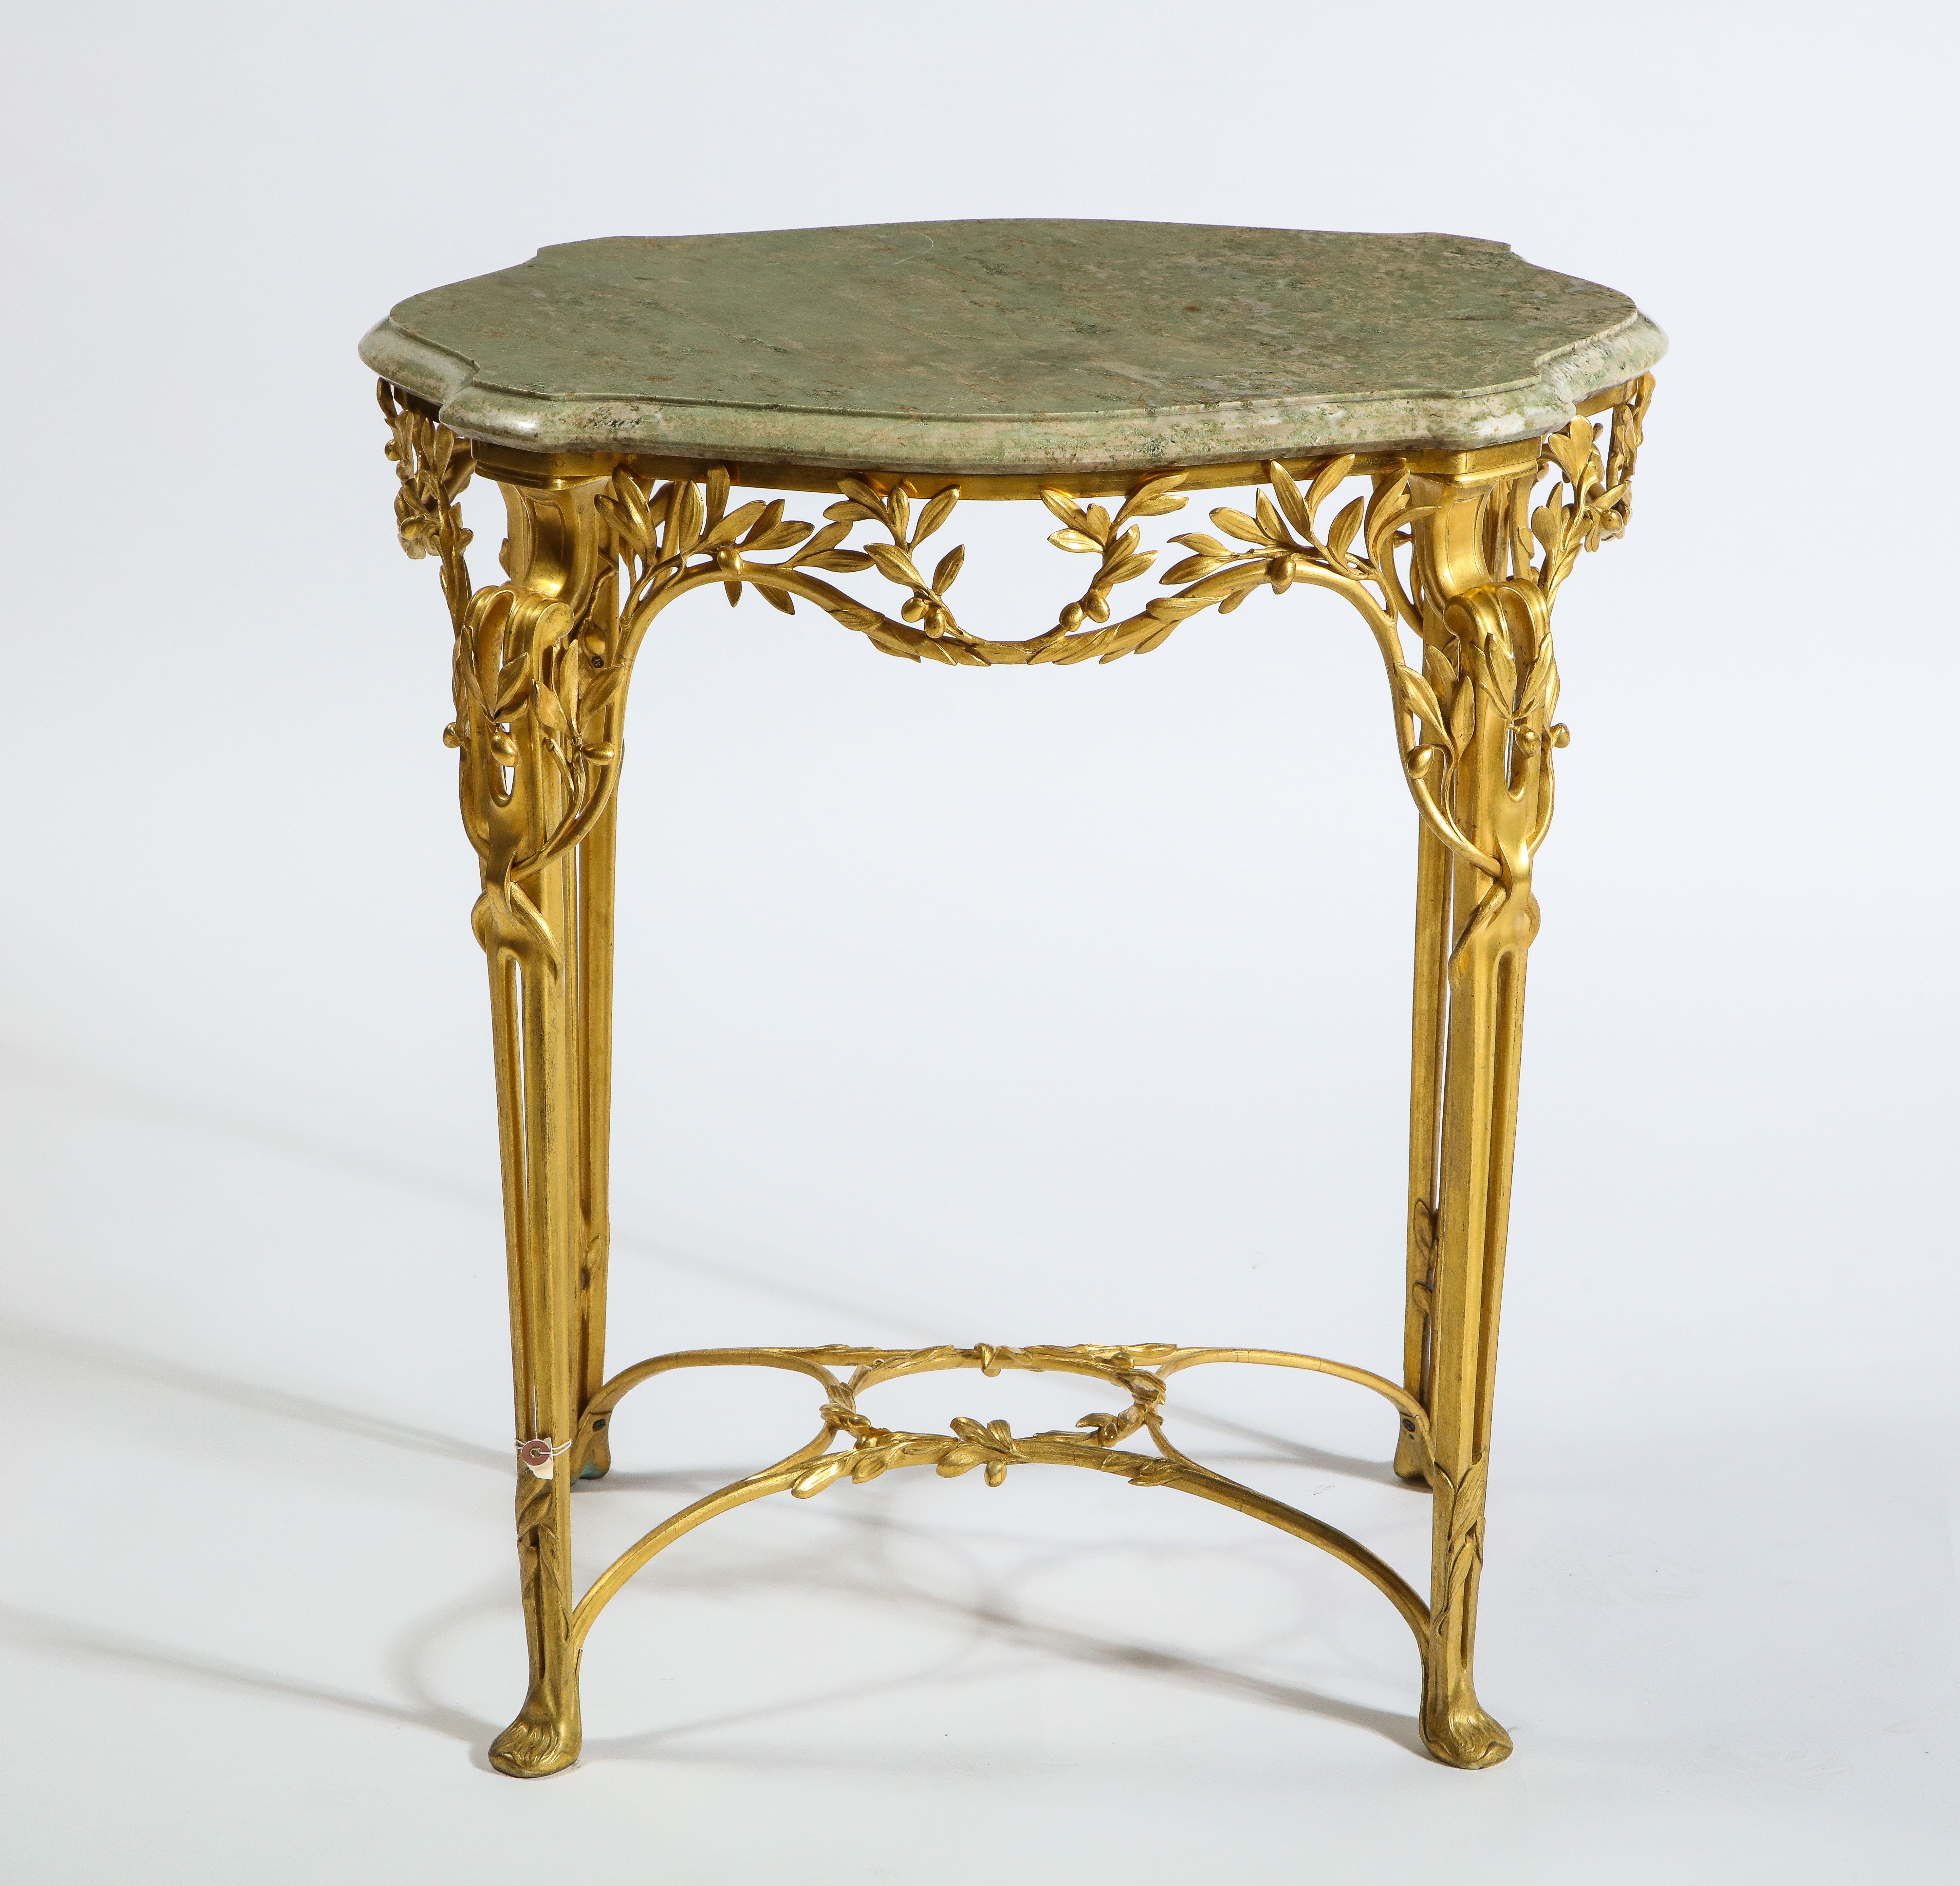 A very unusual and quite exquisite dore bronze and marble-top center table/side table, signed Tiffany & Co., attributed to Louis Comfort Tiffany. This table is exquisitely made by the famous Tiffany & Co., most likely designed by Louis Comfort